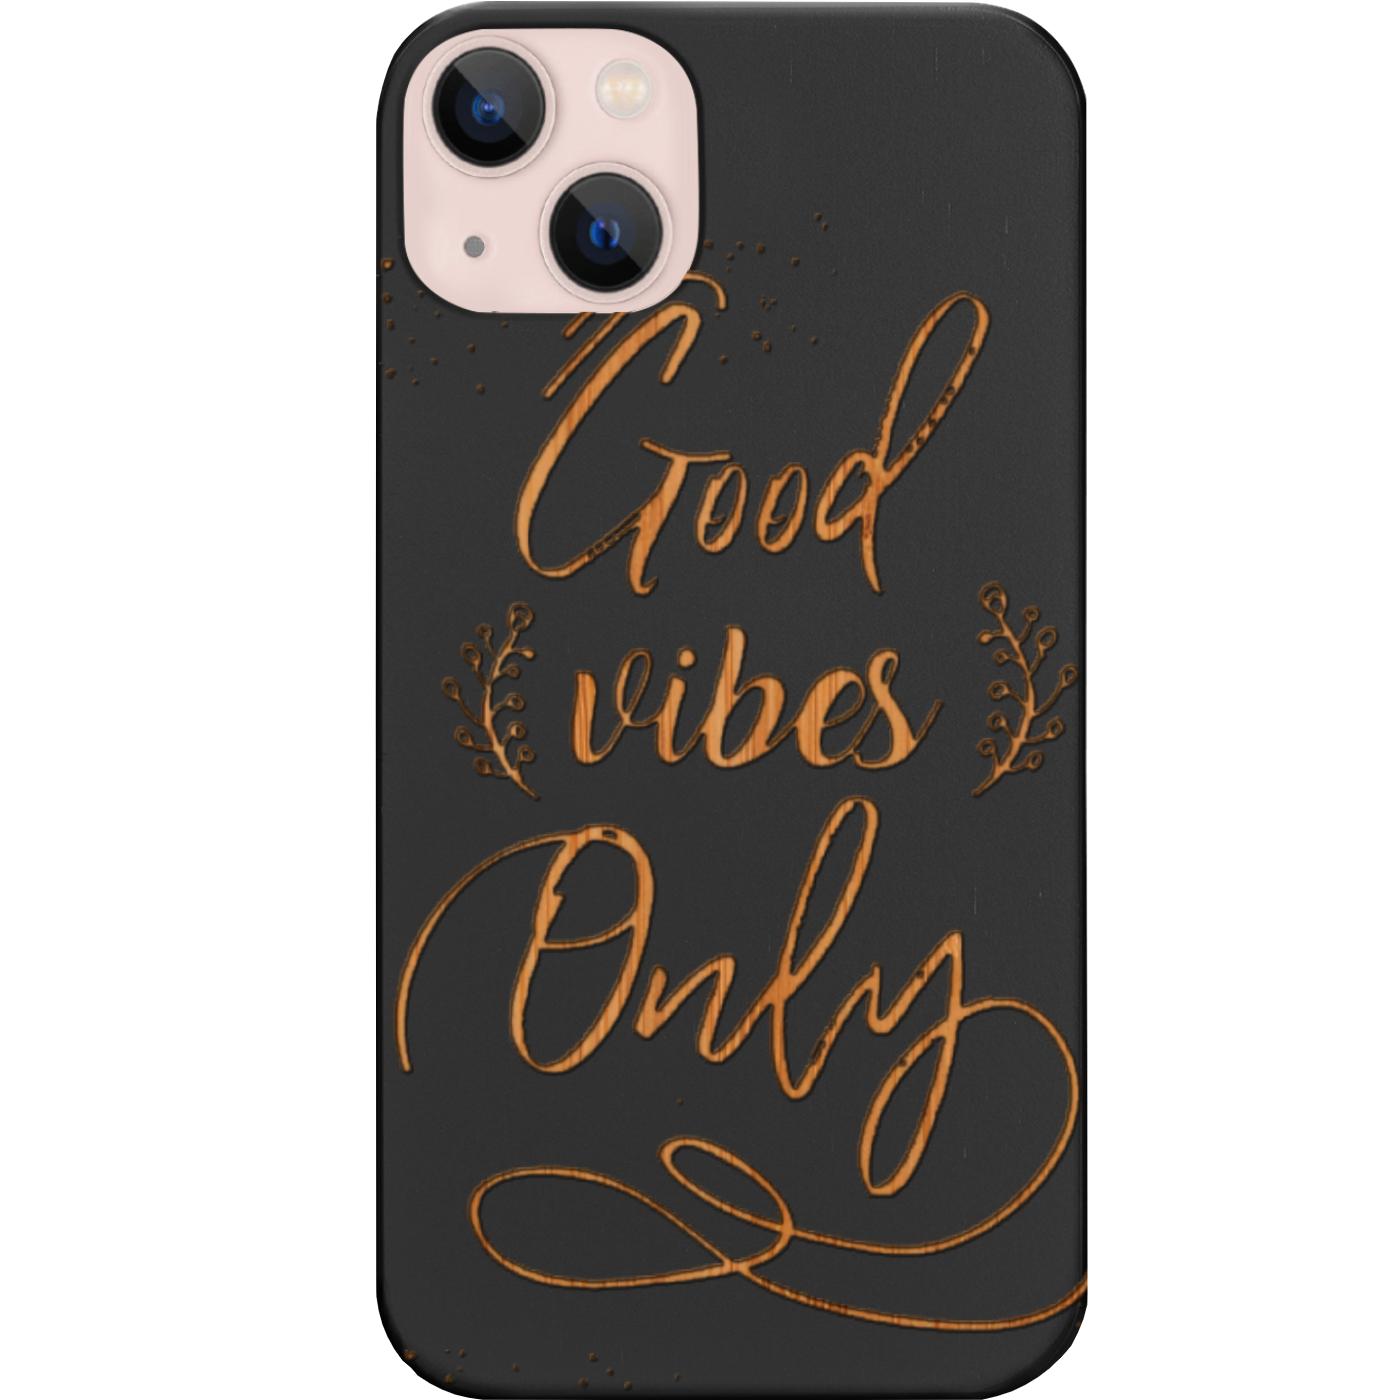 Good Vibes Only - Engraved Phone Case